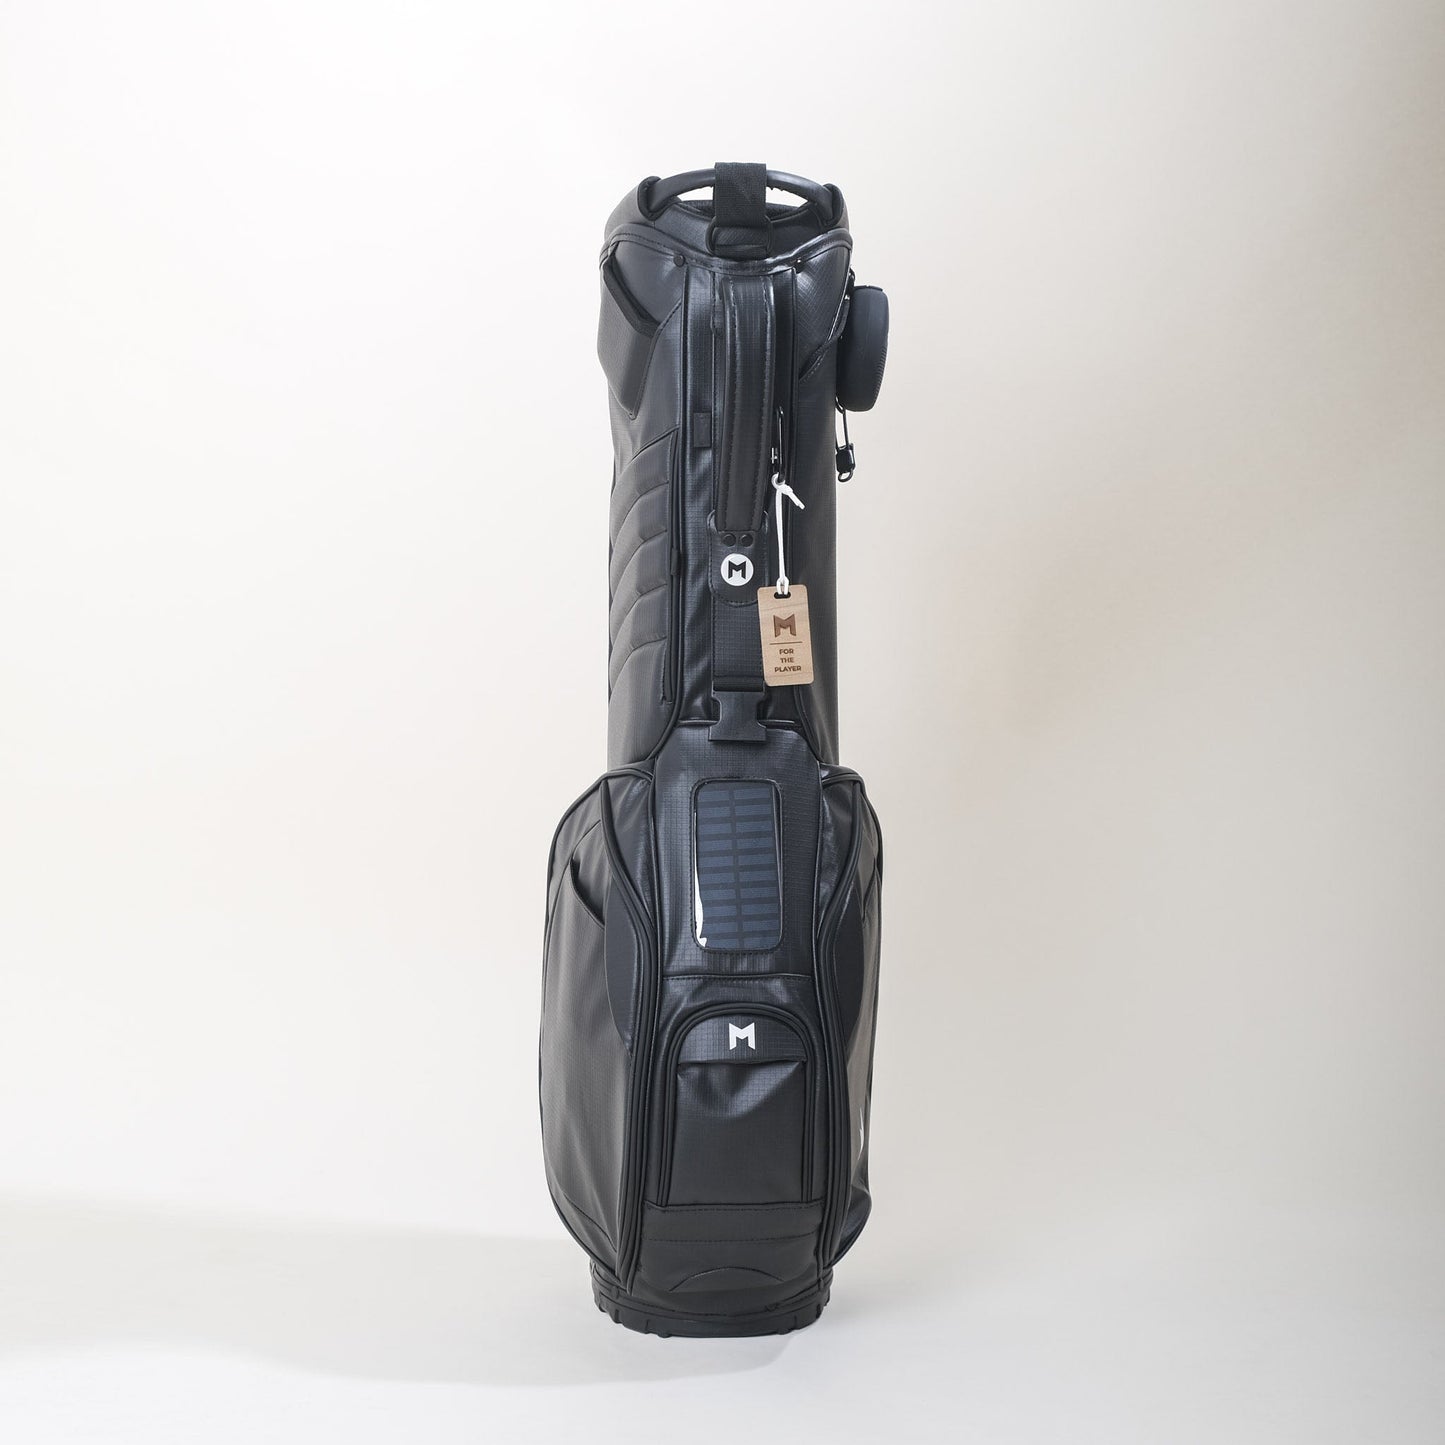 The black MNML GOLF bag featuring all magnetic pockets and a 5-way divider is available for purchase through the Trade It Forward program.